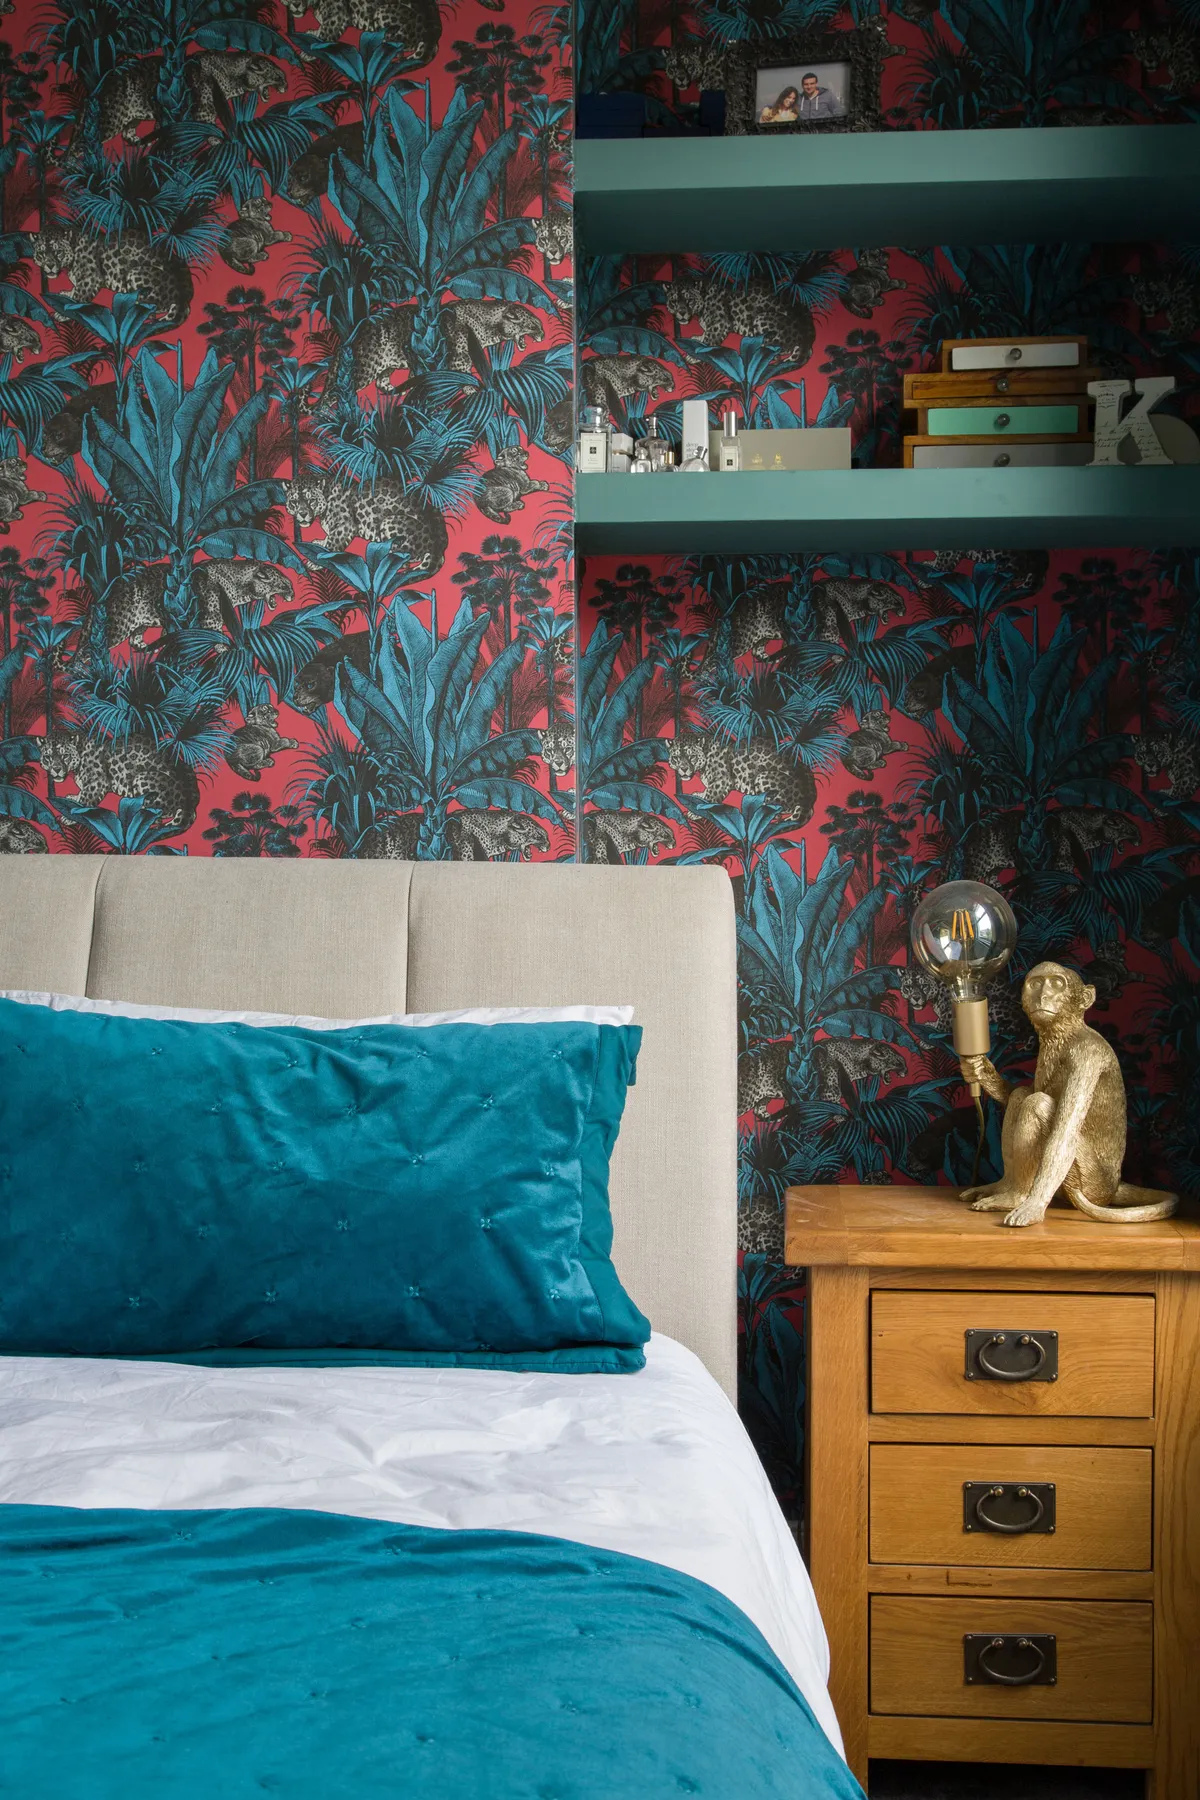 The main bedroom was the only room not in need of any building work, but Kate still put her creative stamp on it. She built her scheme around the wallpaper from Divine Savages, matching the teal tones with luxe bedding